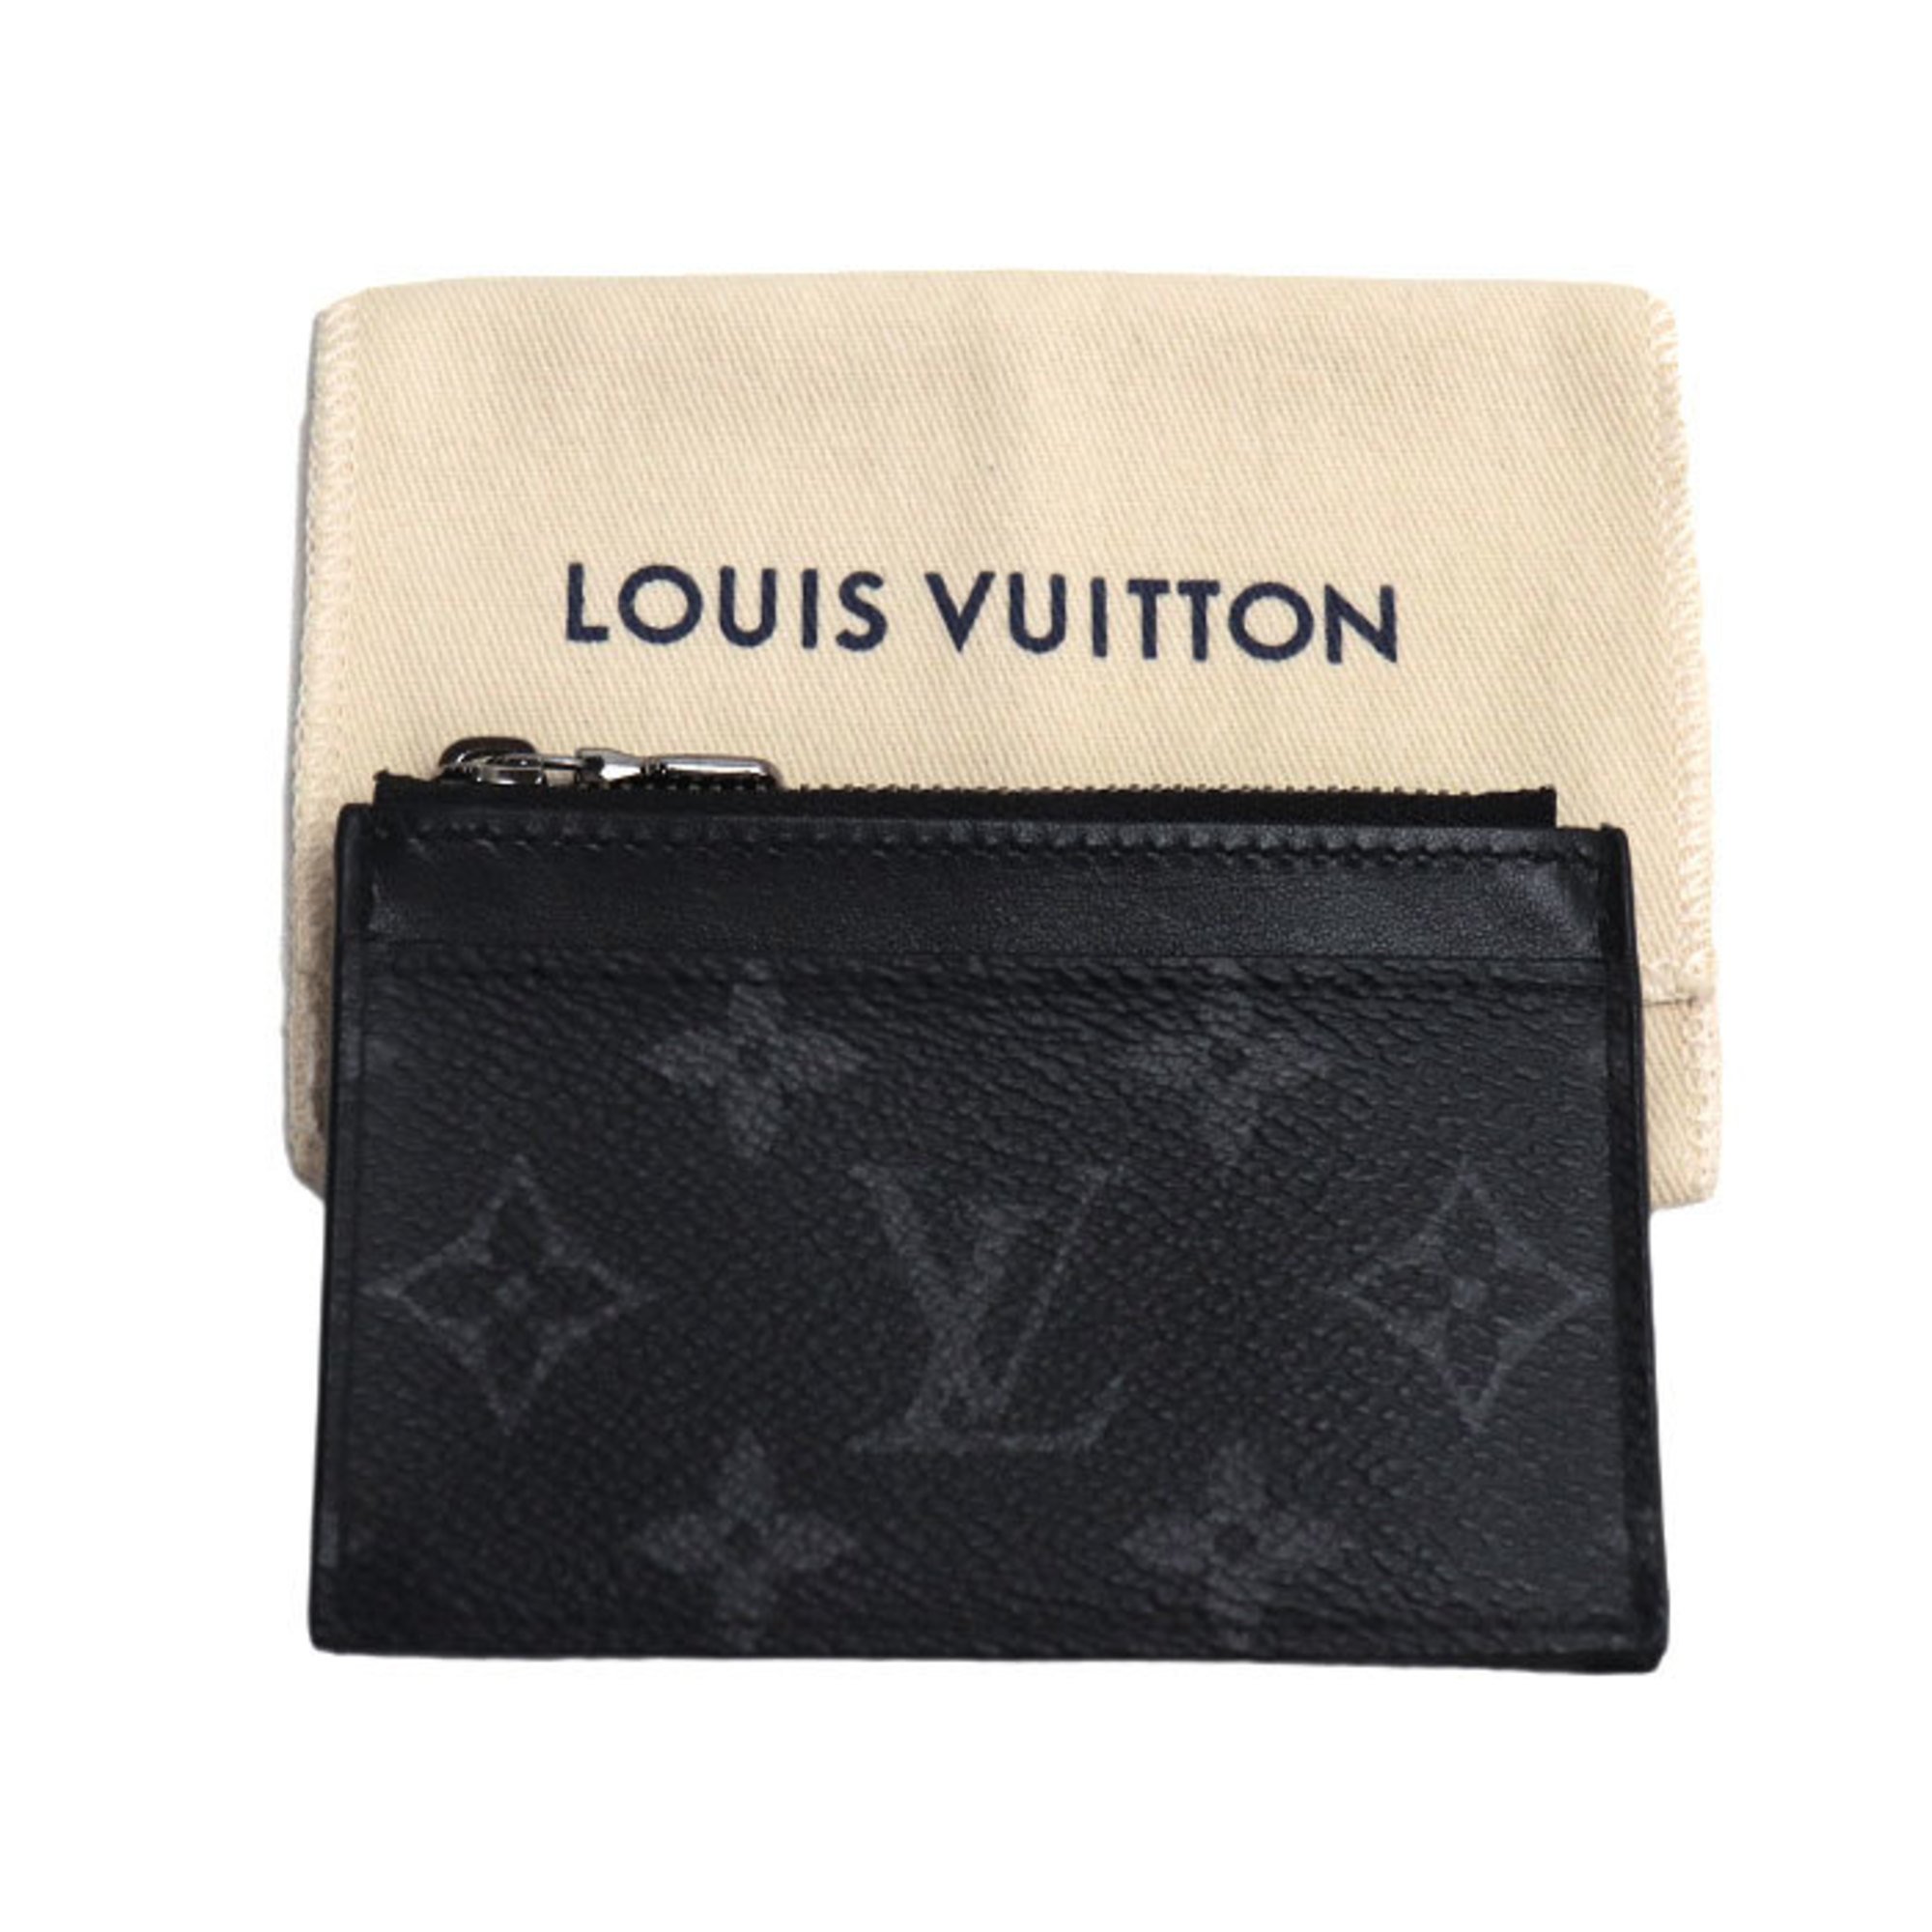 LOUIS VUITTON Compact Coin Card Holder Case Eclipse Gray M82253 IC Chip Men's